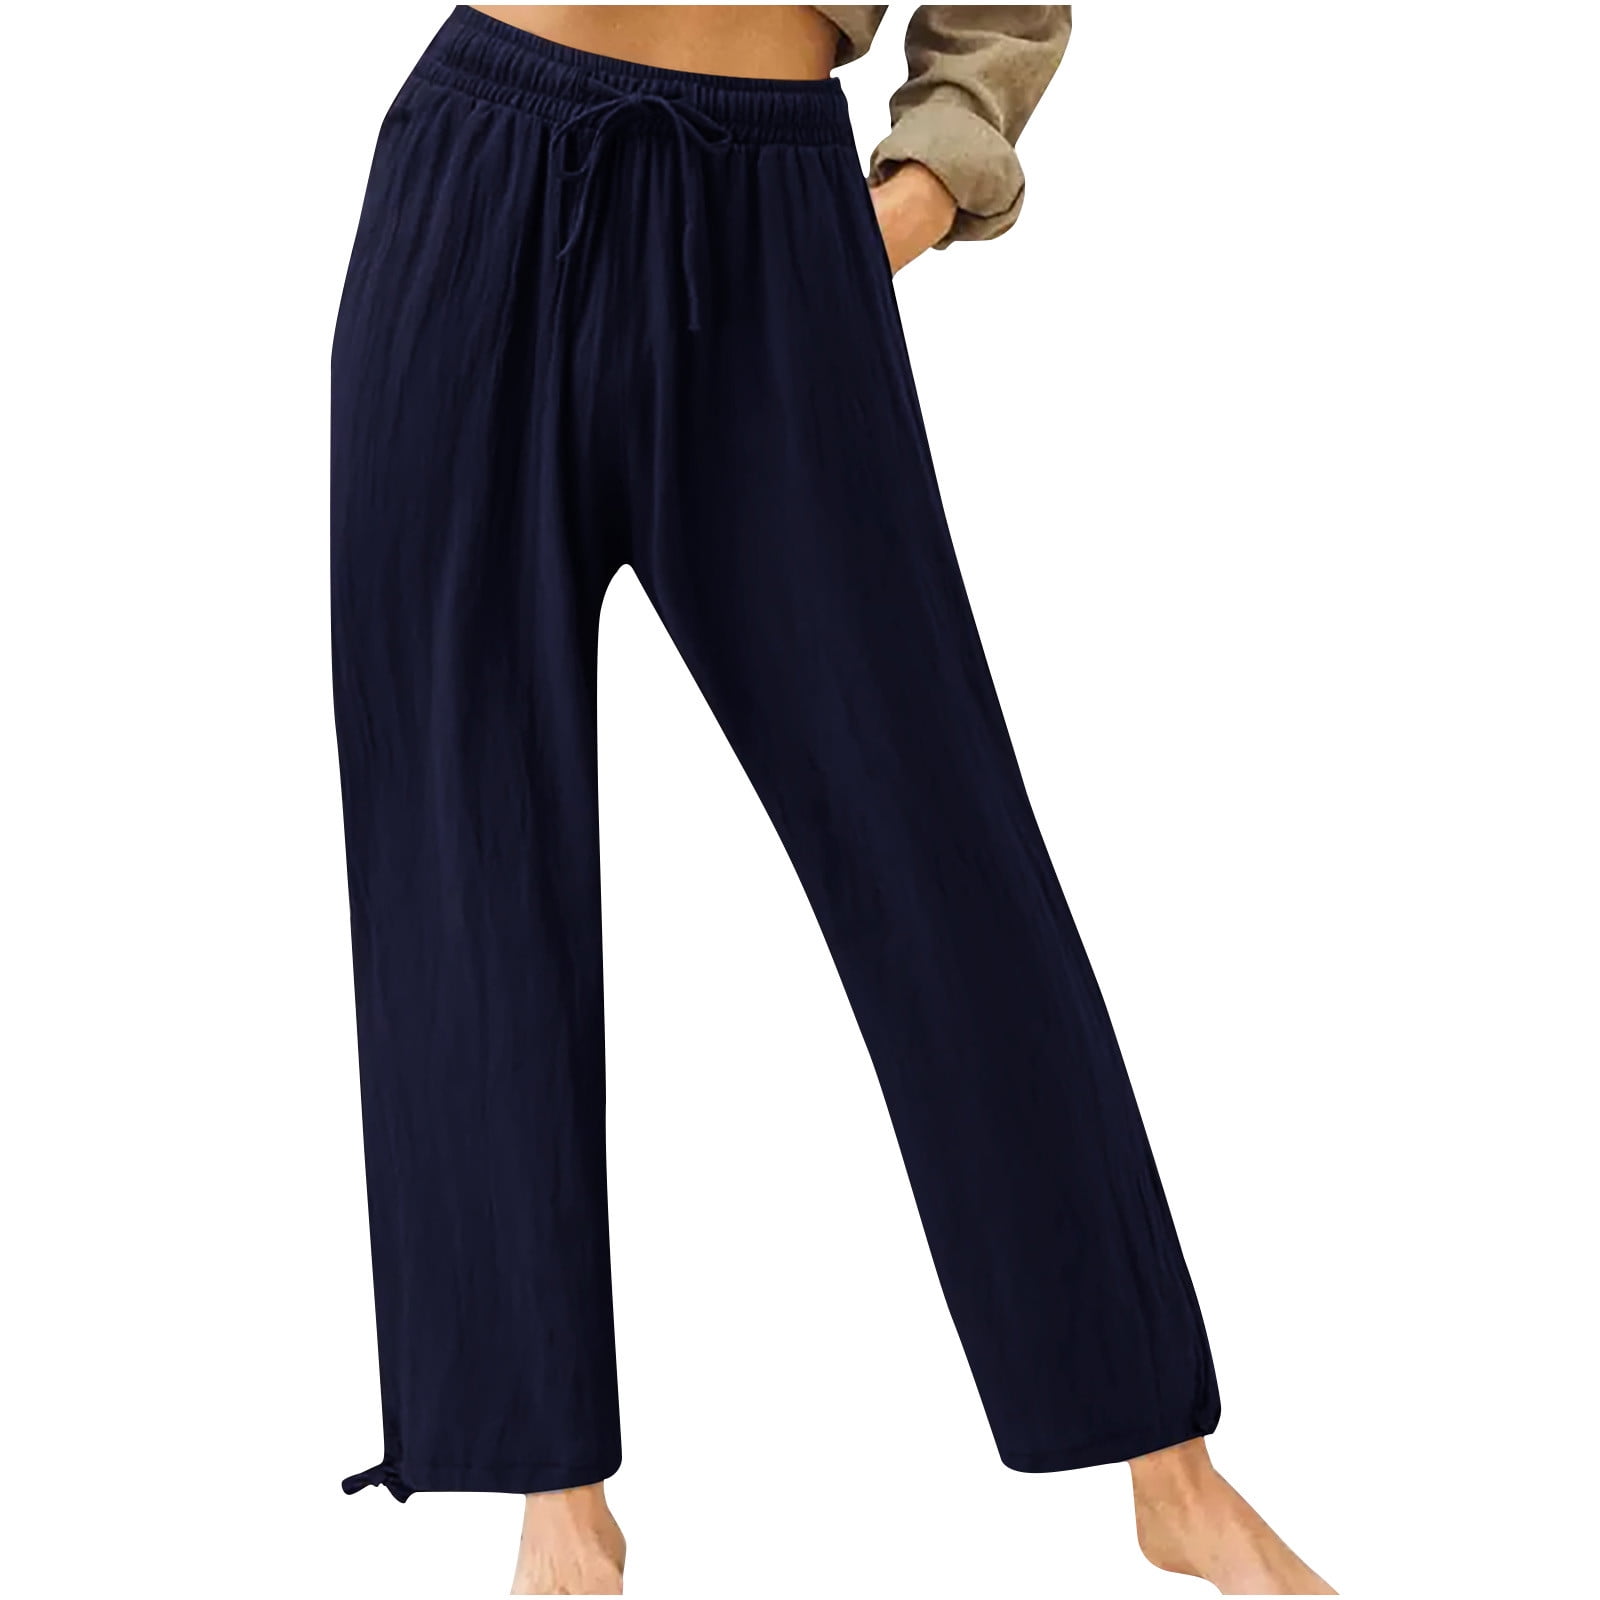 Plus Size Wide Leg Pants for Women Summer Casual Loose Fitting